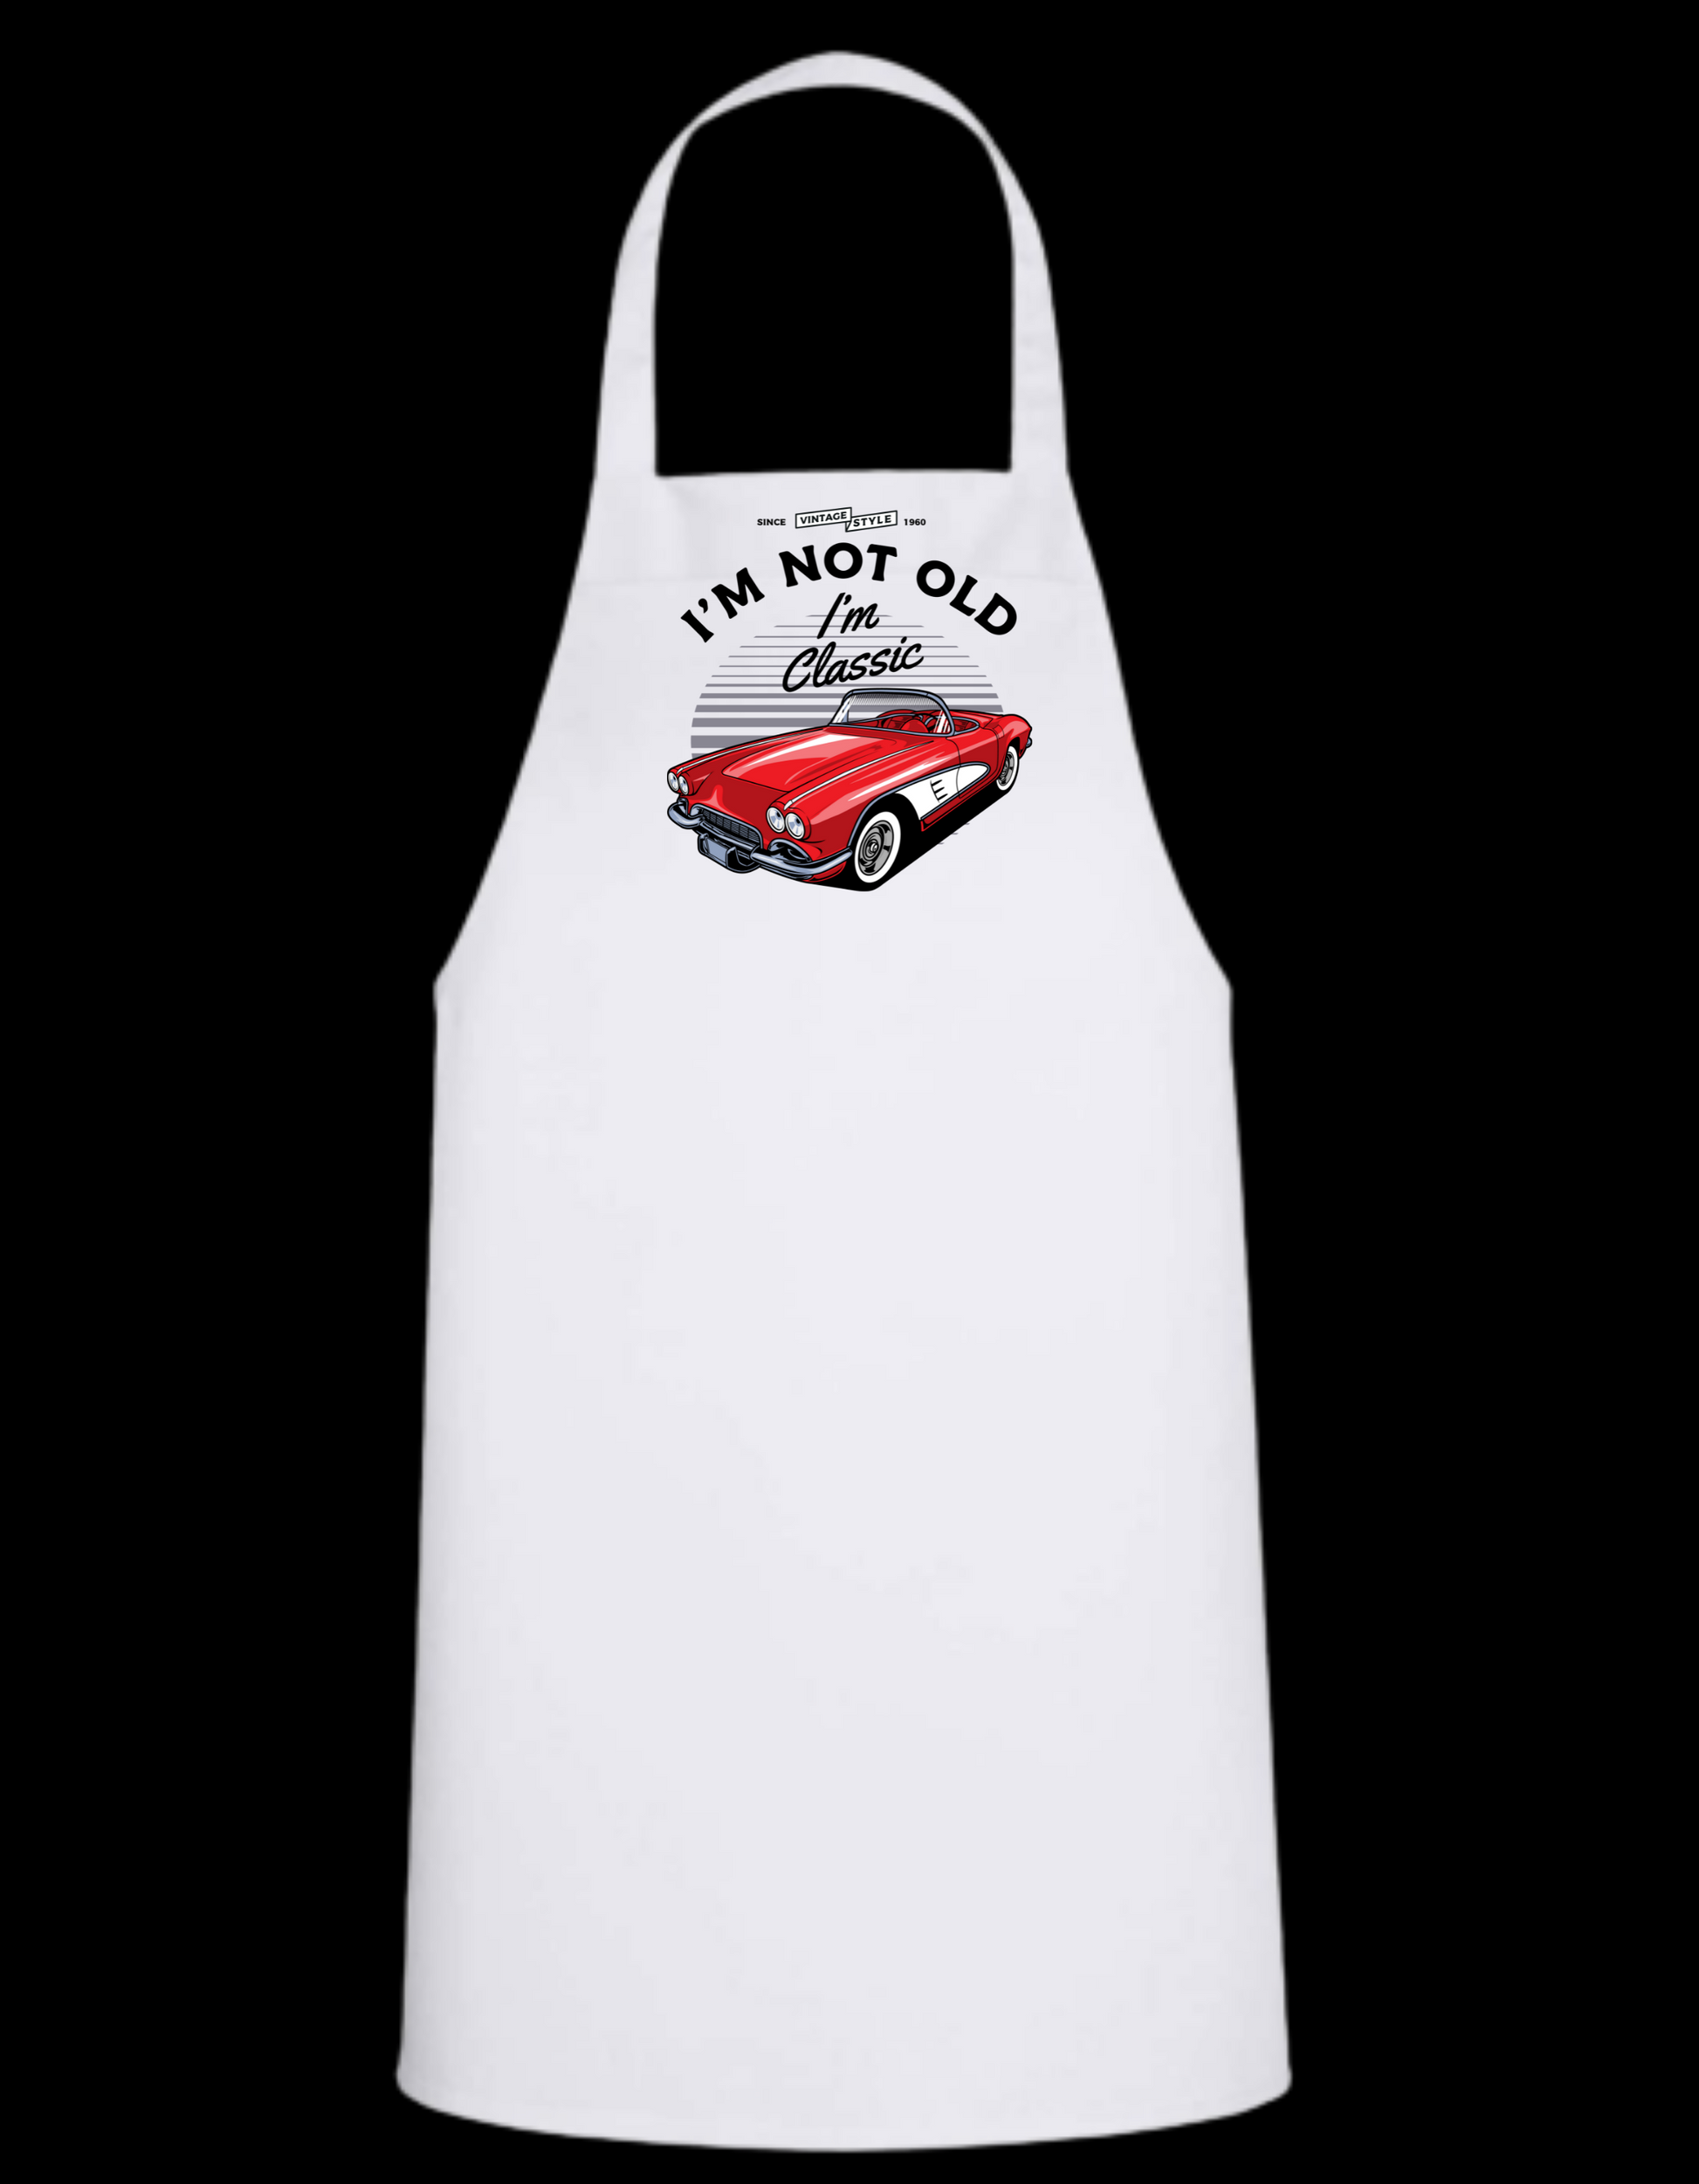 I'm Not Old, I'm Classic - Vette - White Apron with Color design Great Gift - Mister Snarky's